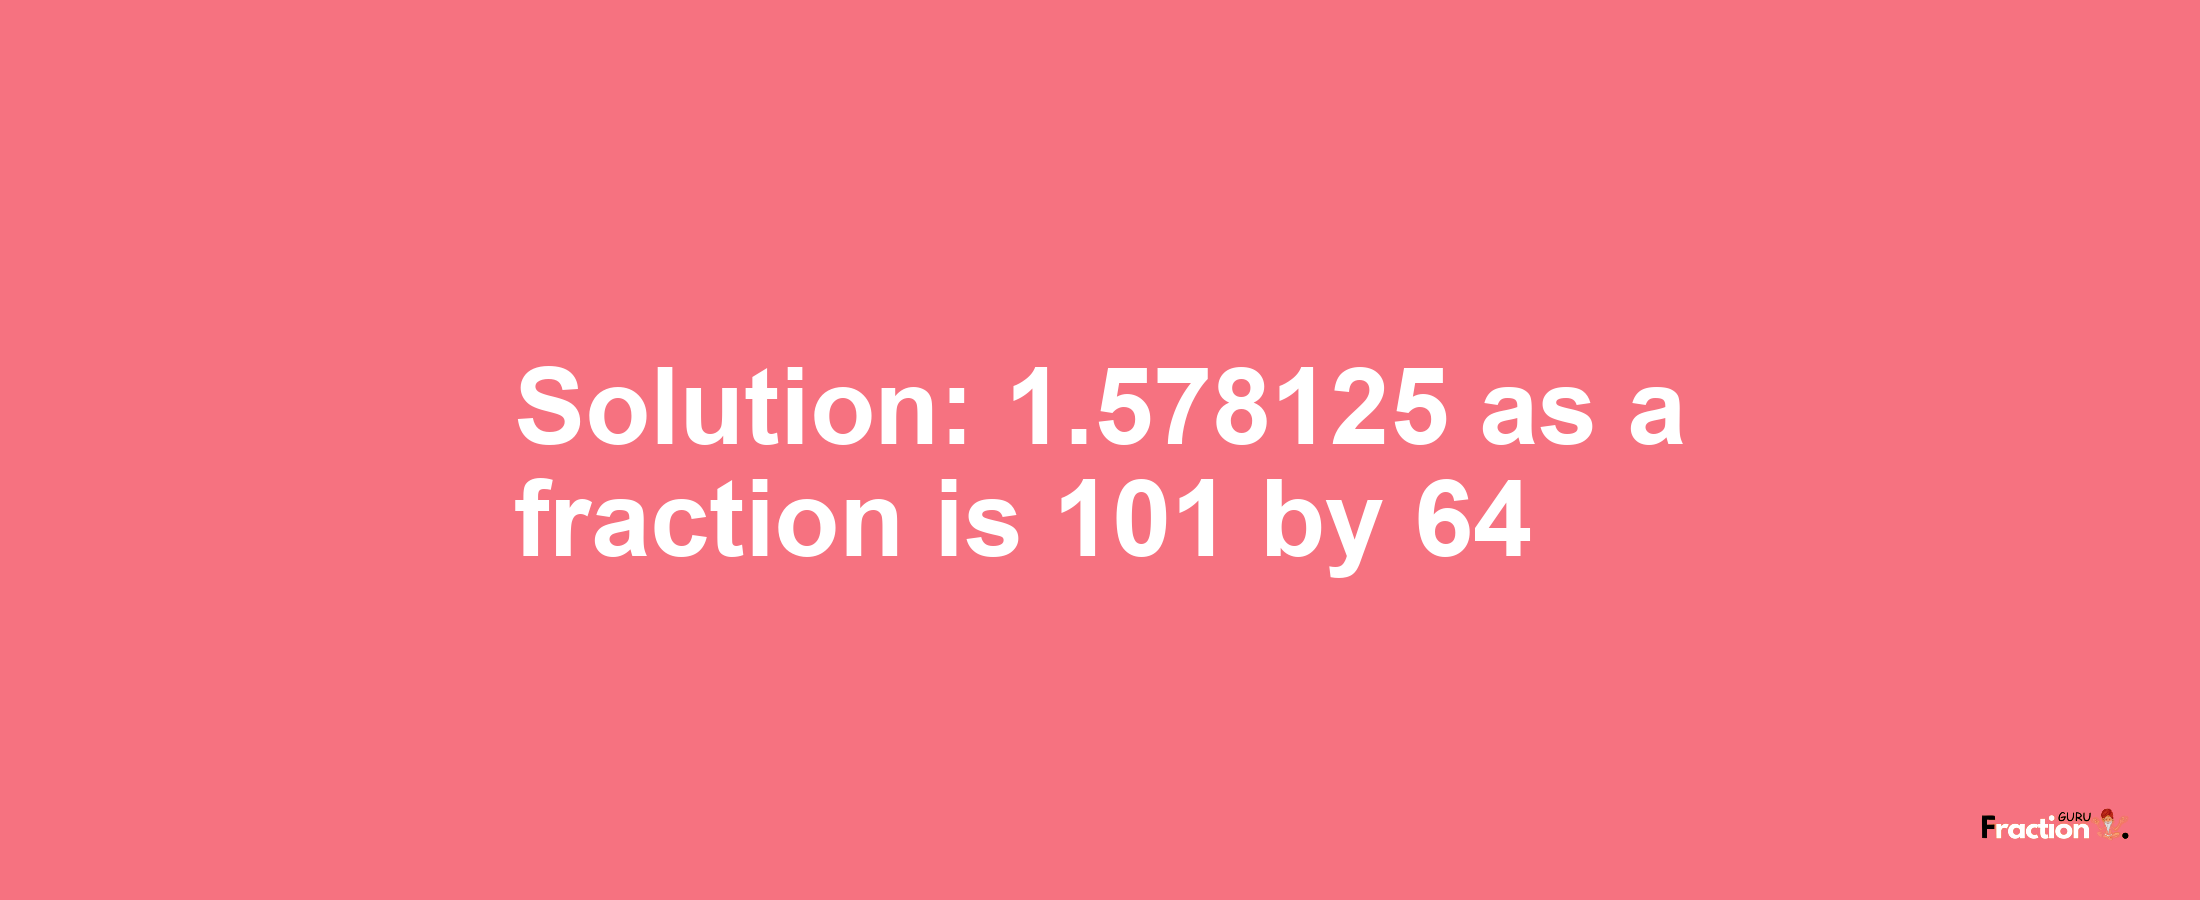 Solution:1.578125 as a fraction is 101/64